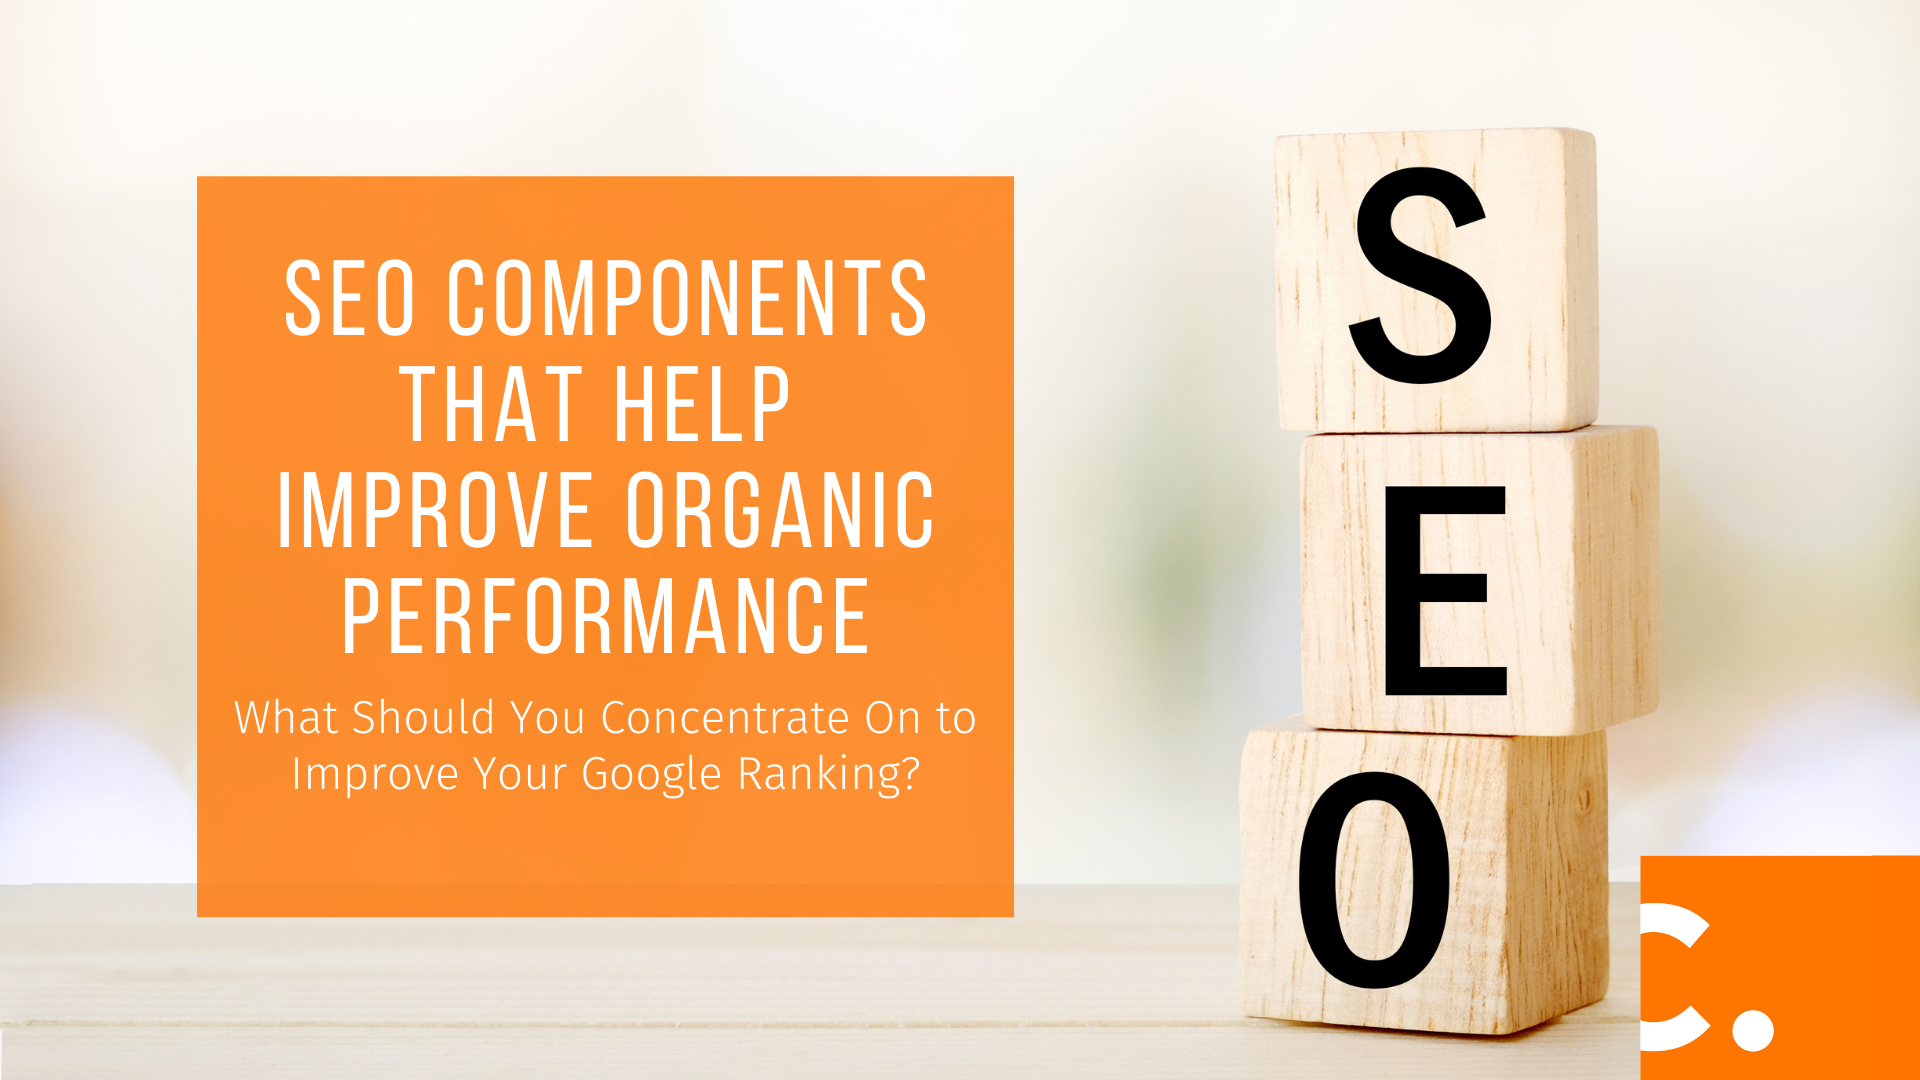 SEO is an important tactic for lead generation. Organic performance can be improved through simple tasks.